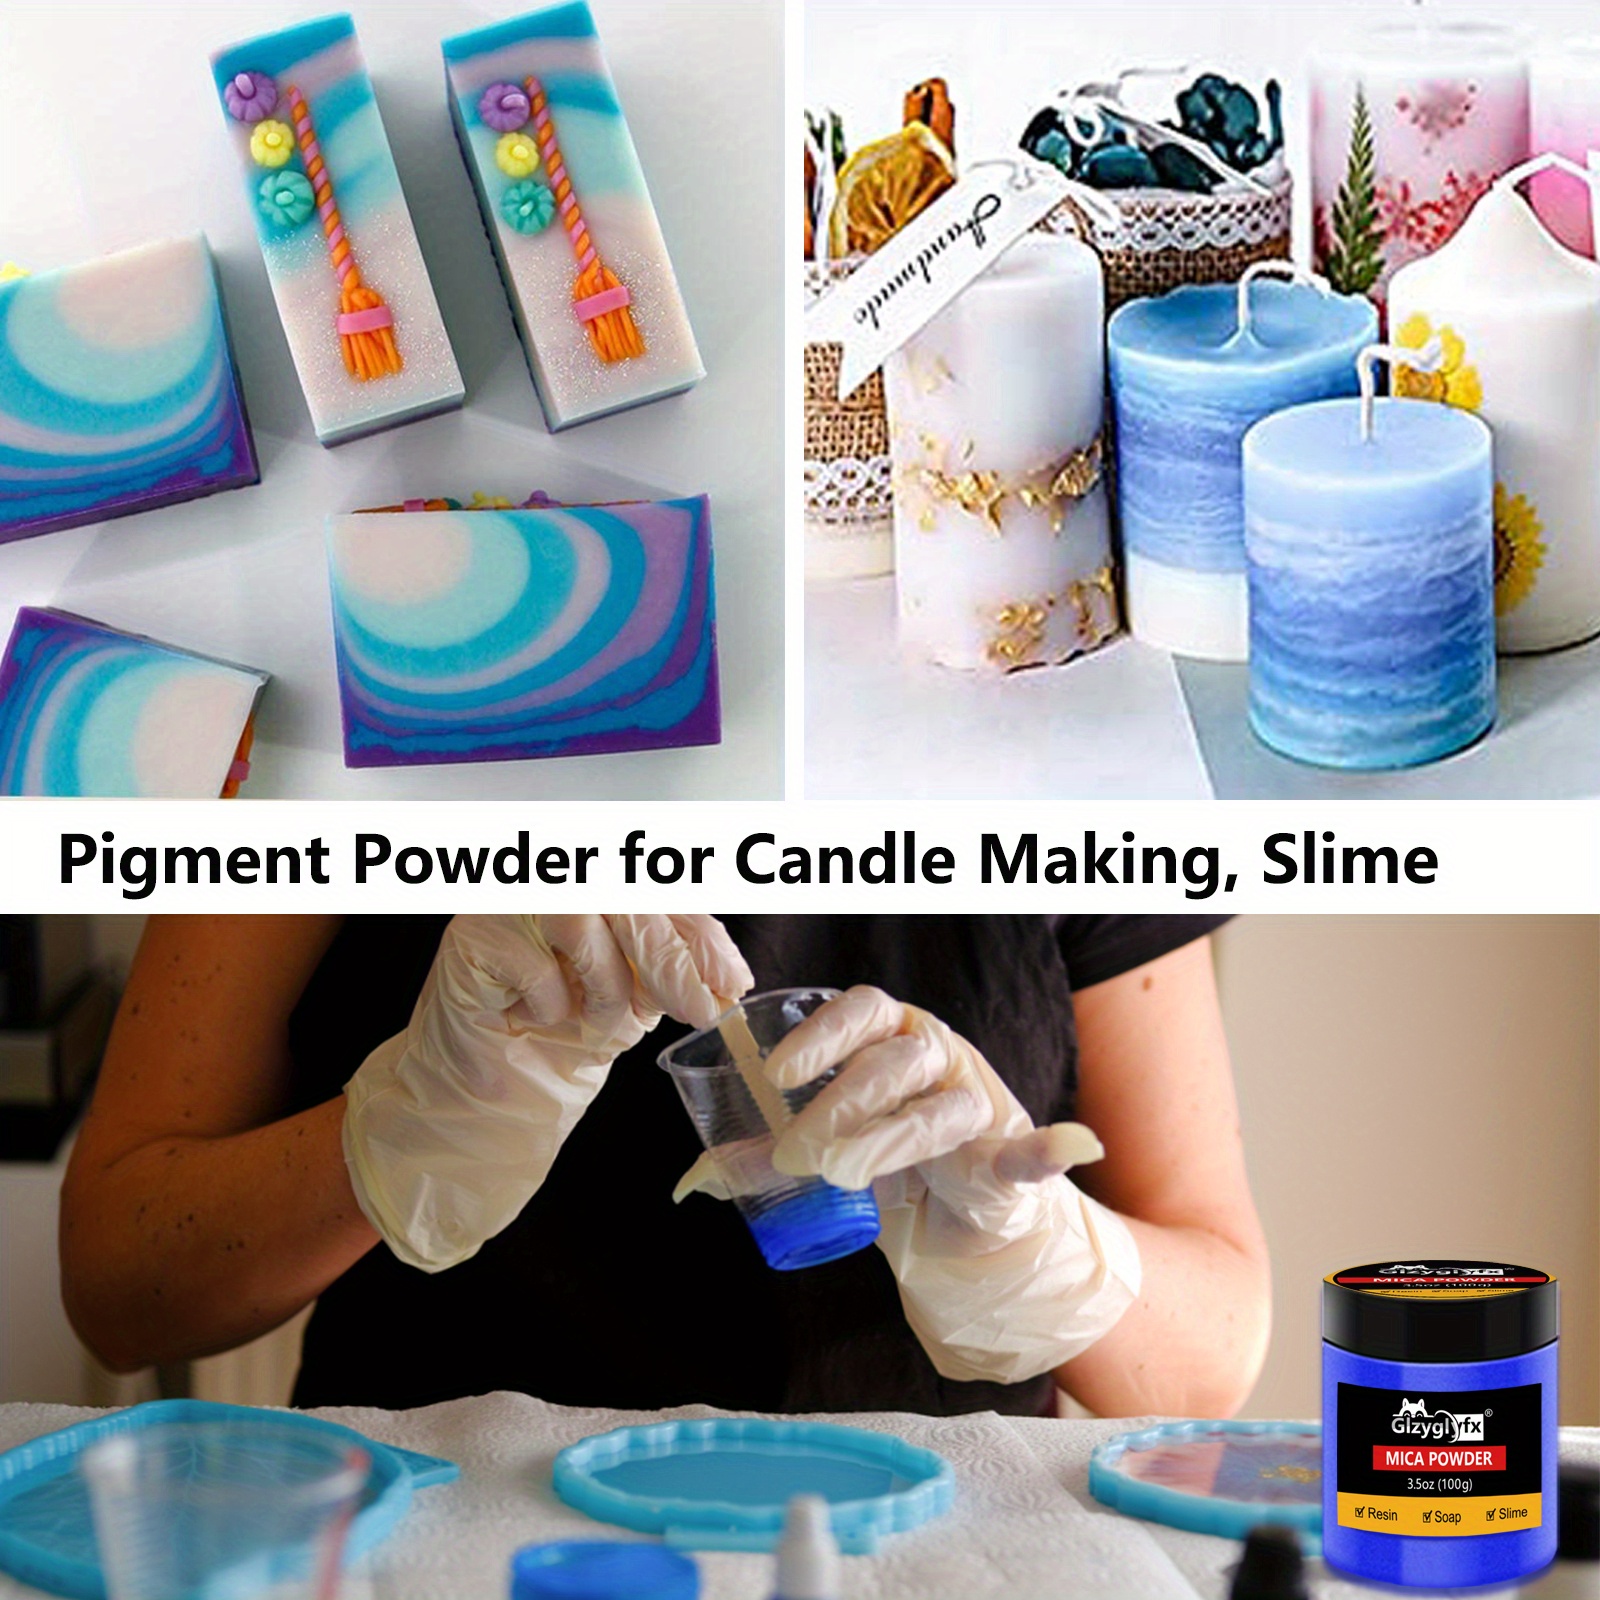 Mica Powder for Epoxy Rsin,Natural Mica Pigment Powder for Soap Making Colorant,Candle Making,Bath Bomb,Lip Gloss,Slime,Epoxy Resin Dye,Paint